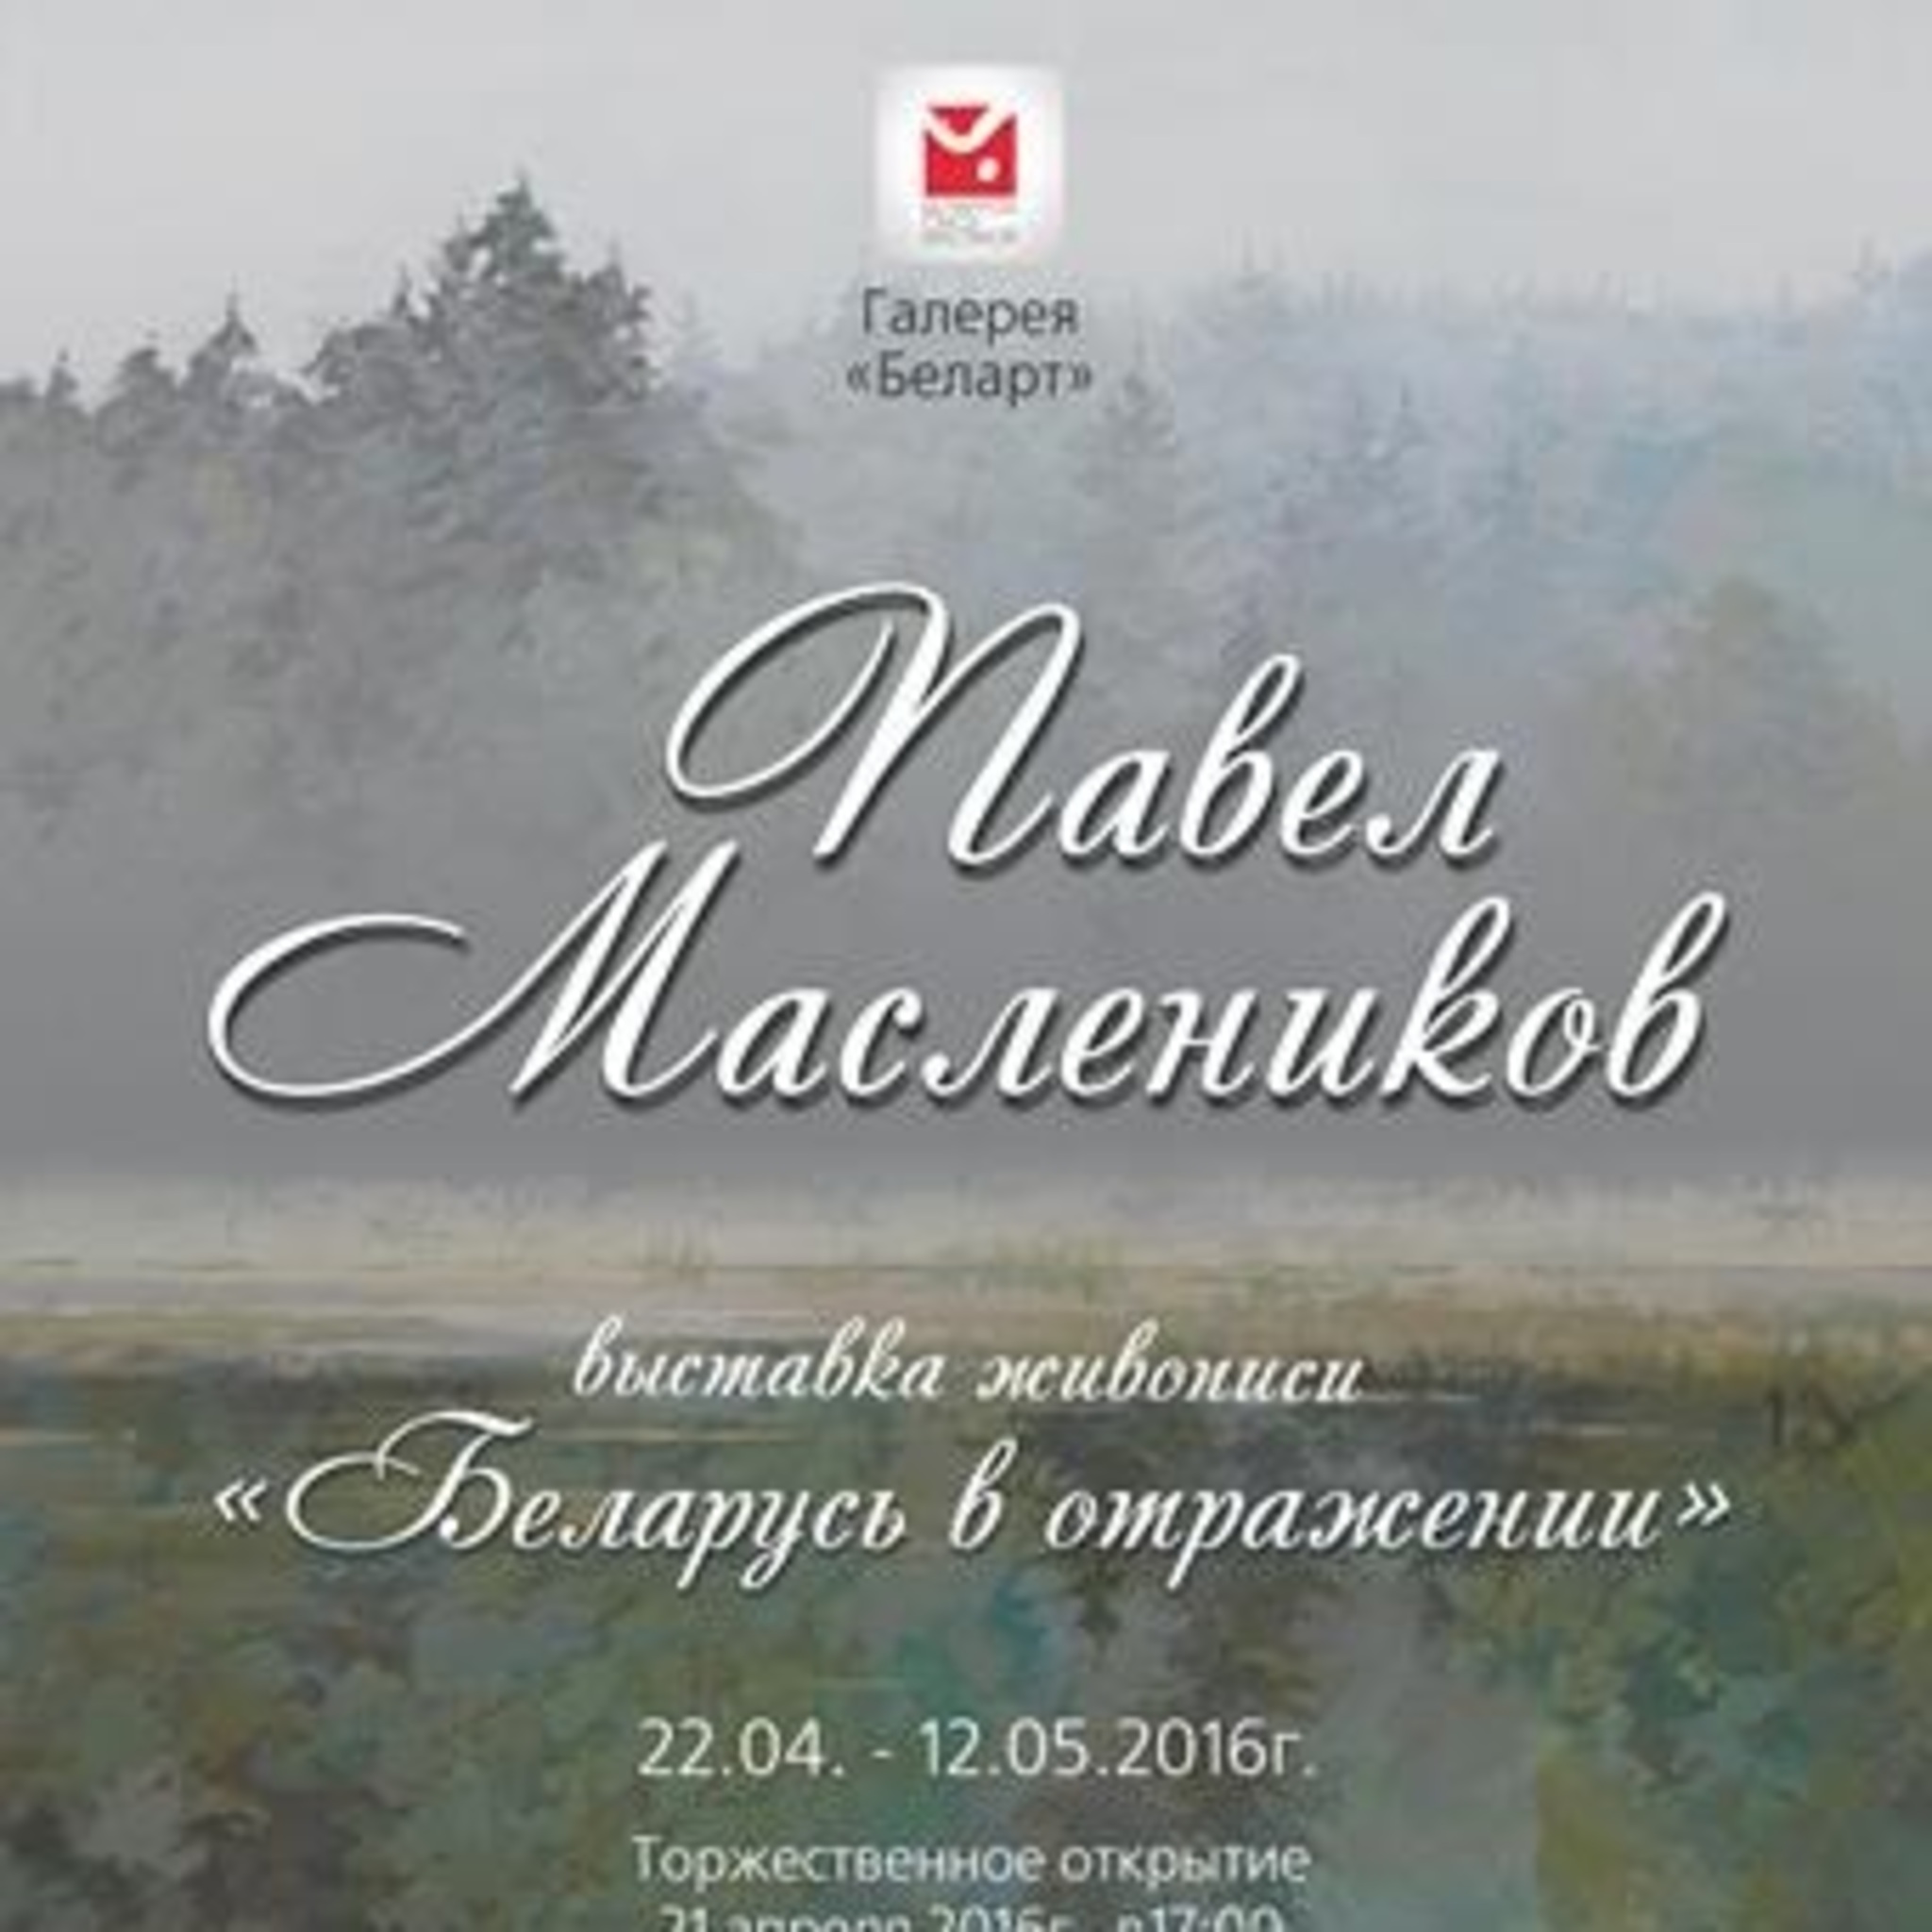 Personal exhibition of paintings by Pavel Maslennikov Belarus in the reflection